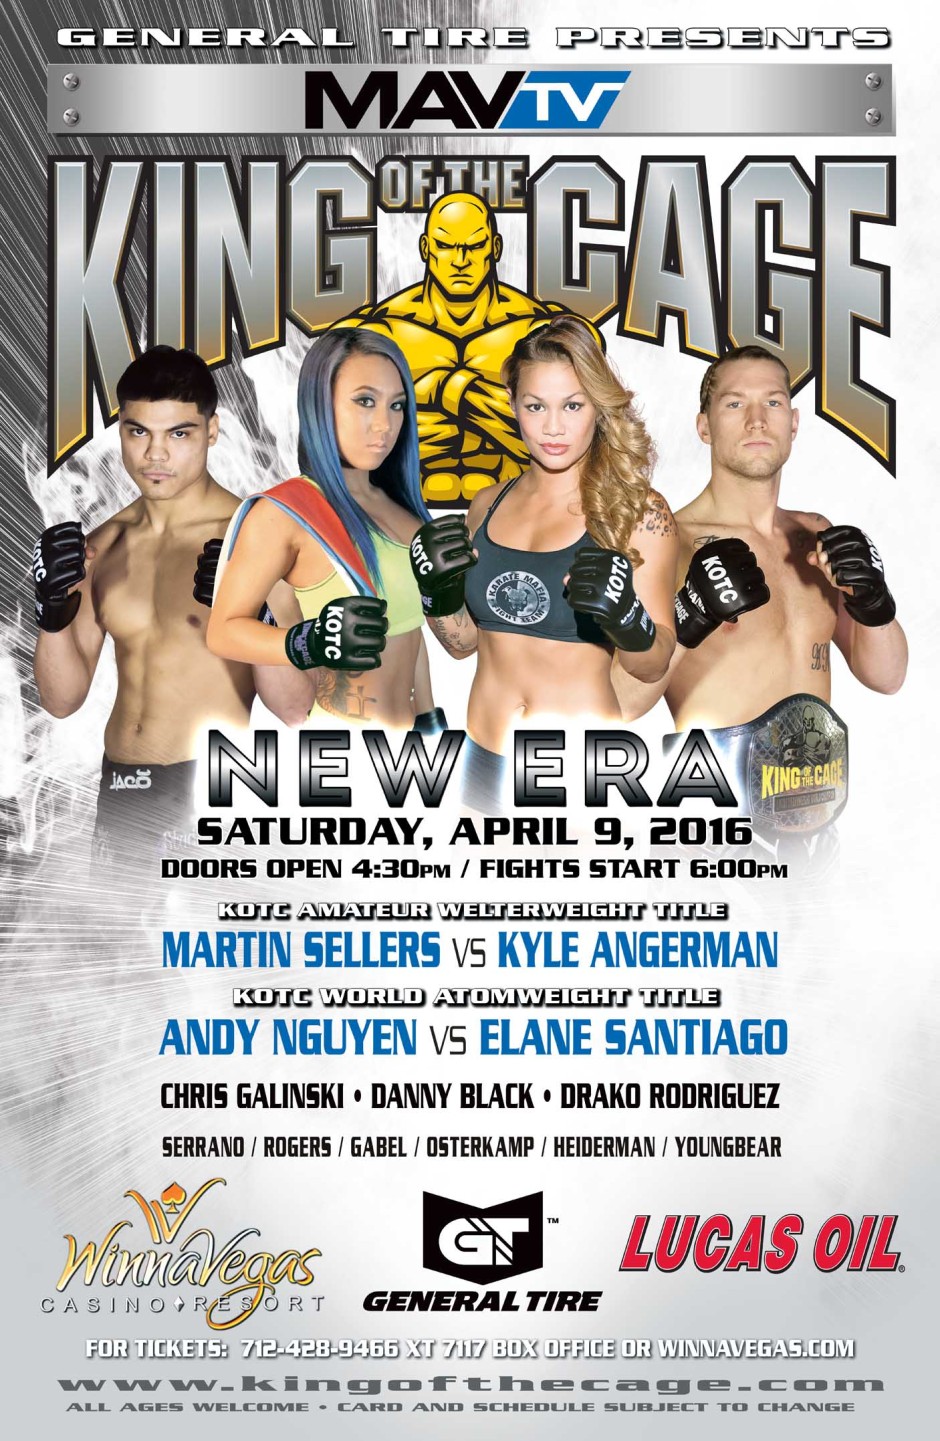 King of the Cage Returns to WinnaVegas Casino Resort on April 9 for